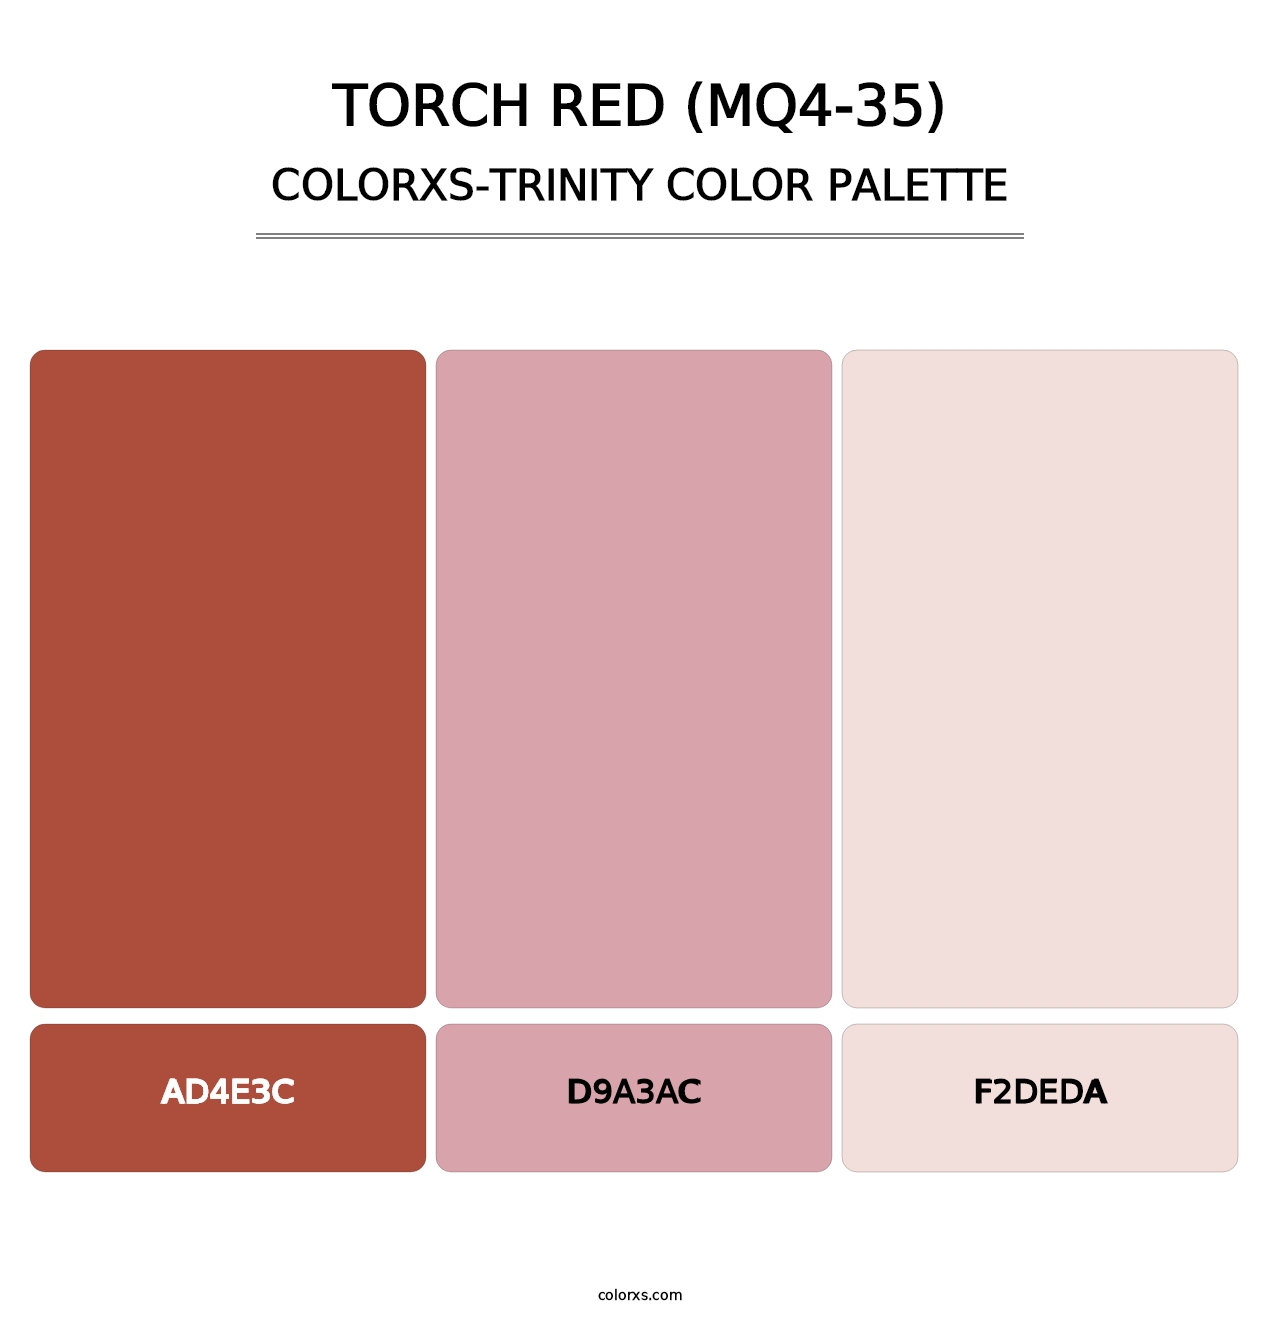 Torch Red (MQ4-35) - Colorxs Trinity Palette